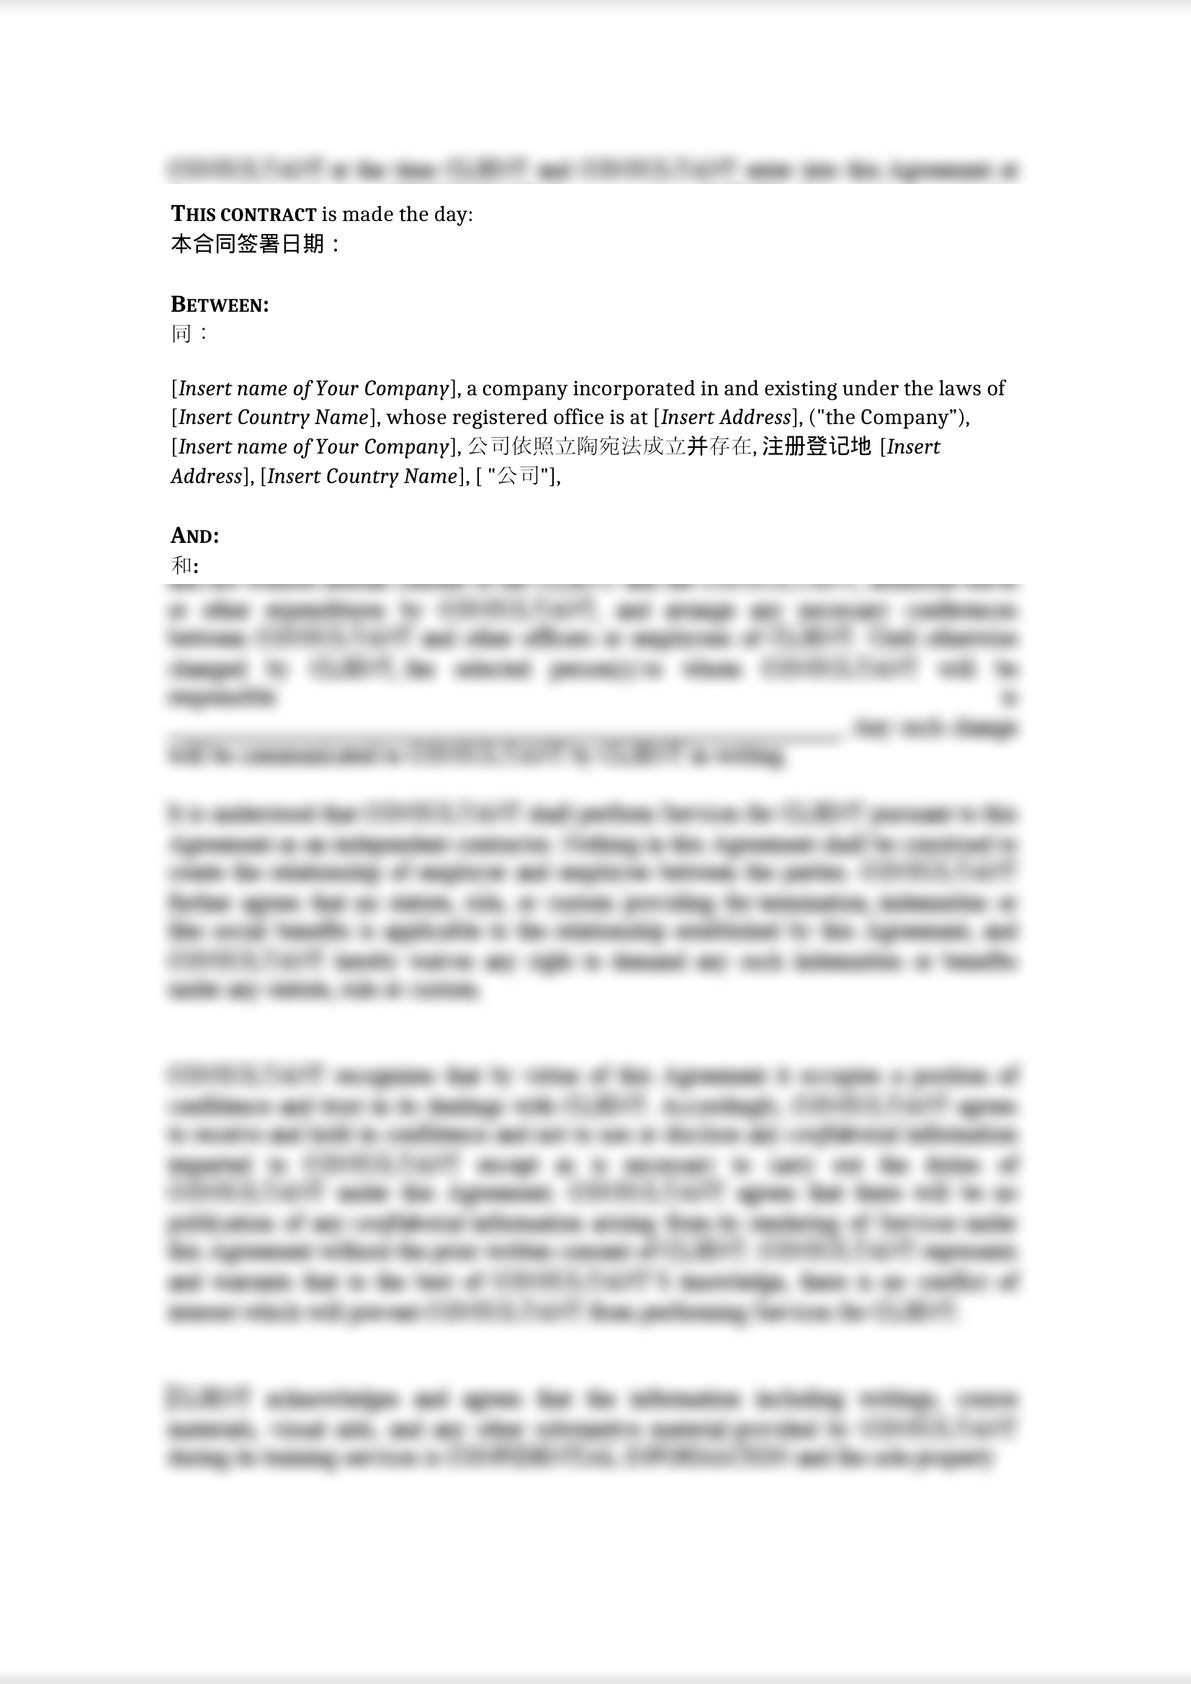 lexub-supply-contract-template-in-both-english-and-chinese-china